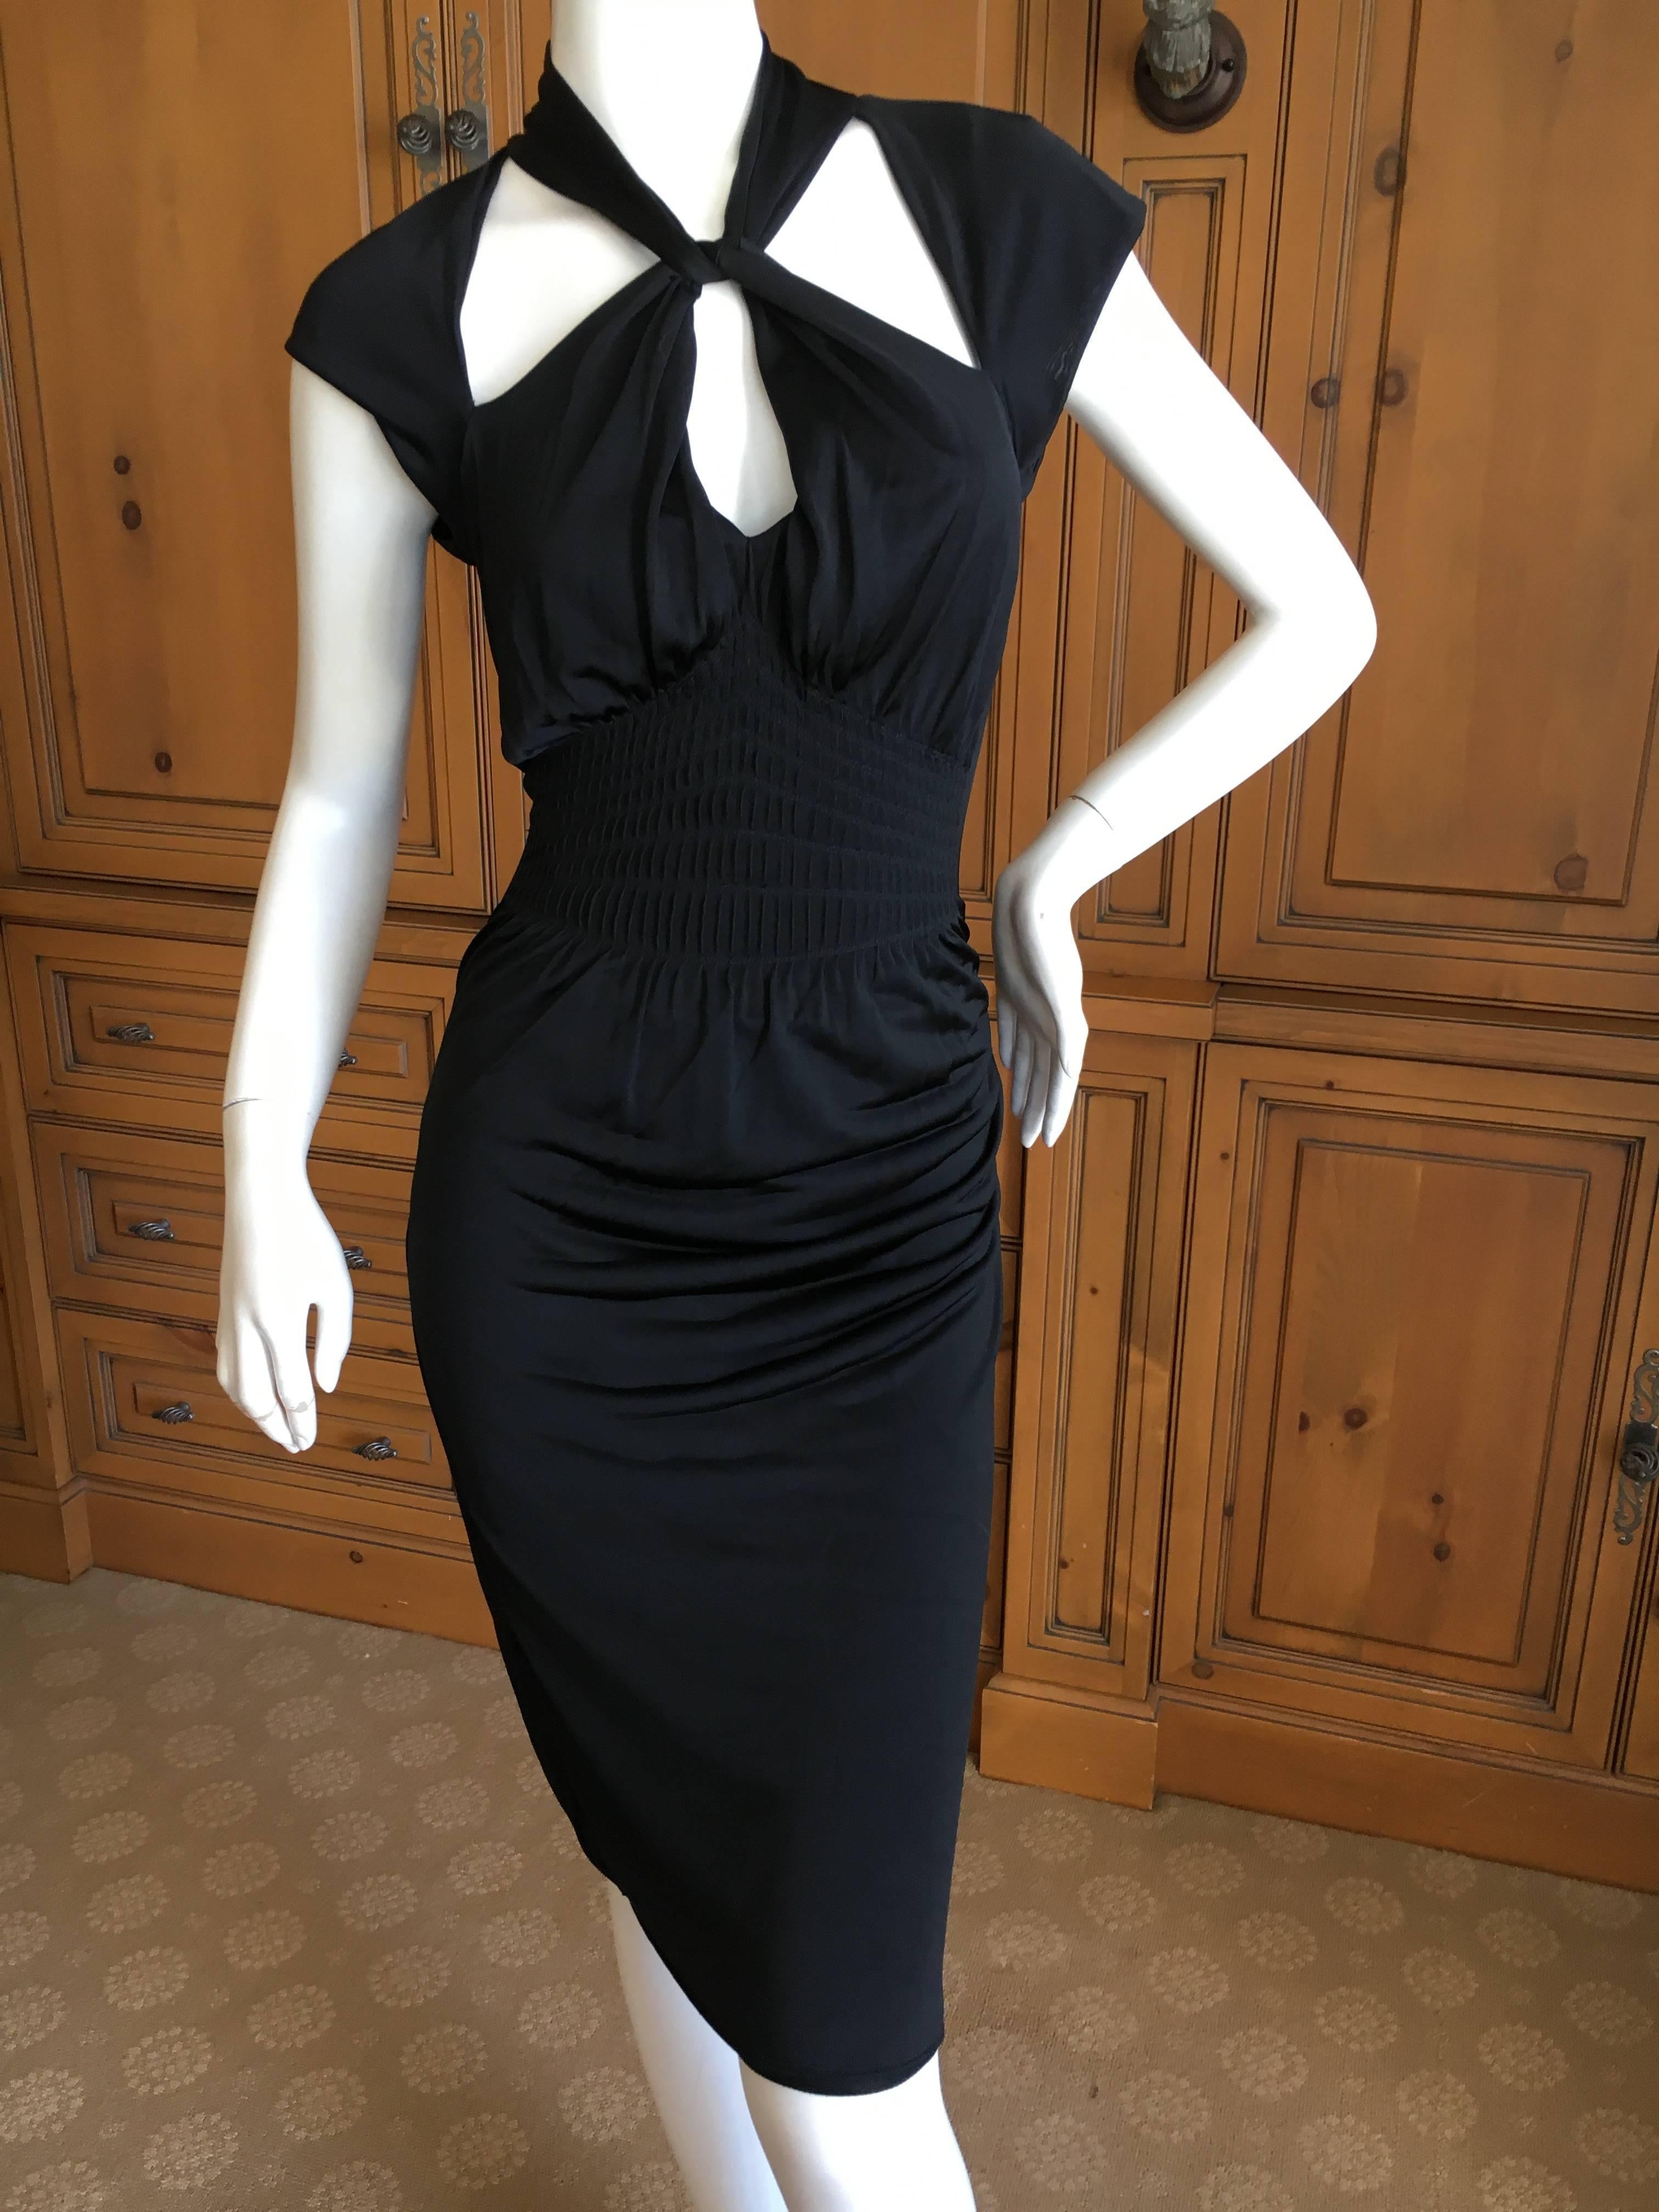 Gucci by Tom Ford Black Backless Knot Dress.
This is classic Tom Ford, sexy coming and going.
Size M.
Bust 38"
Waist 30"
Hips 40"
Length 42"
Excellent condition